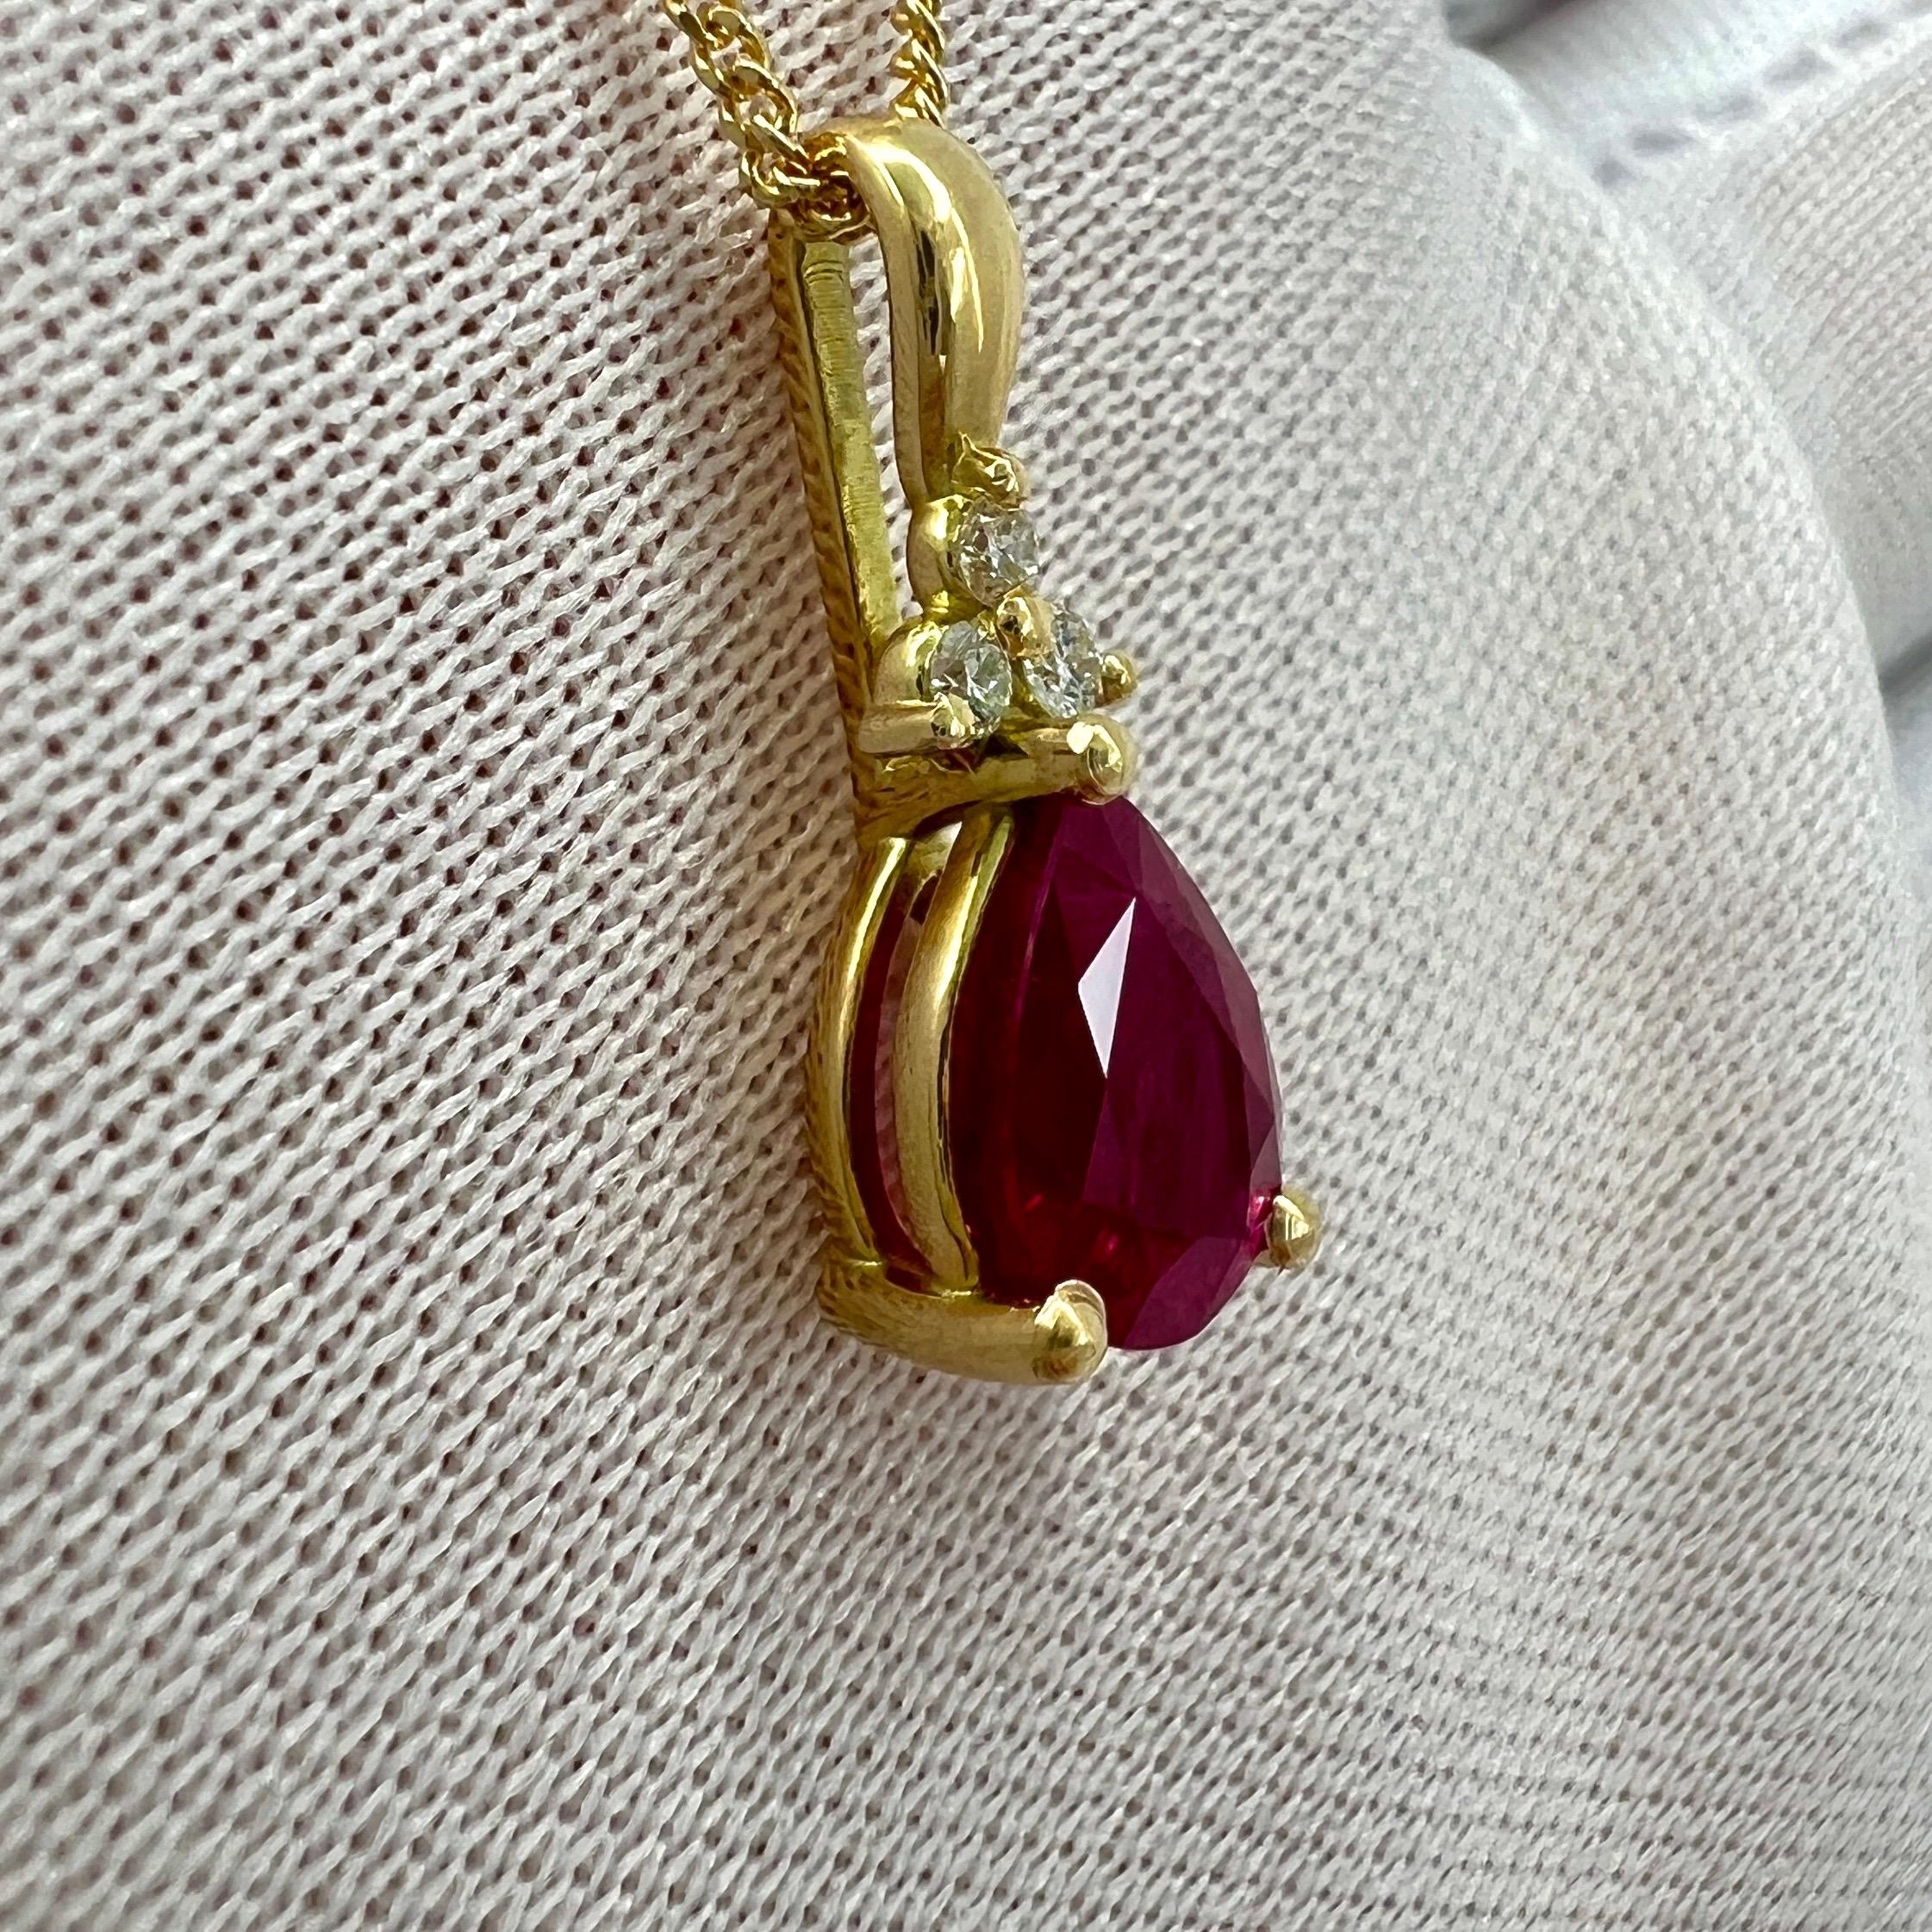 Natural 1.37ct Pear Cut Ruby And Diamond 18k Yellow Gold Pendant Necklace For Sale 6